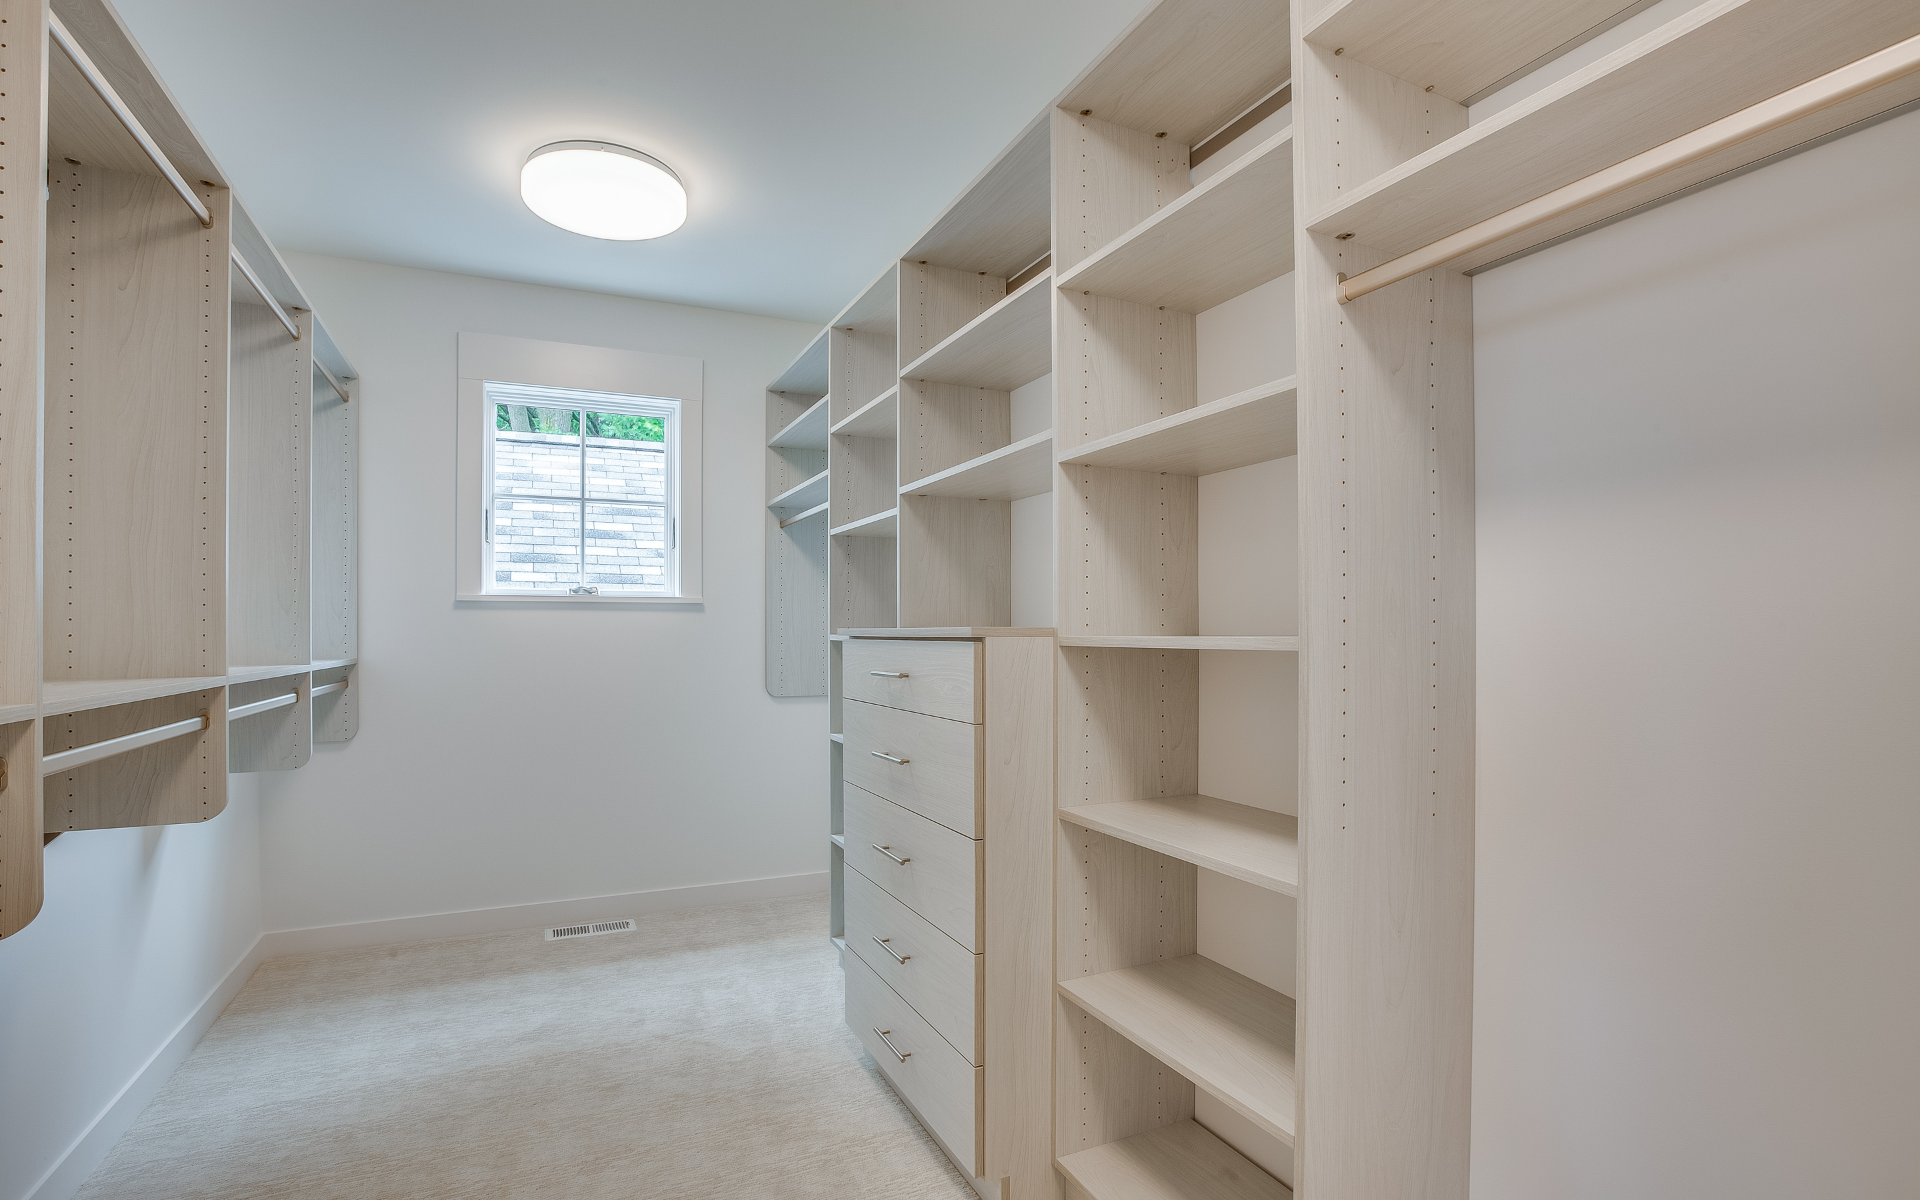 Small space closet with wall mounted shelving